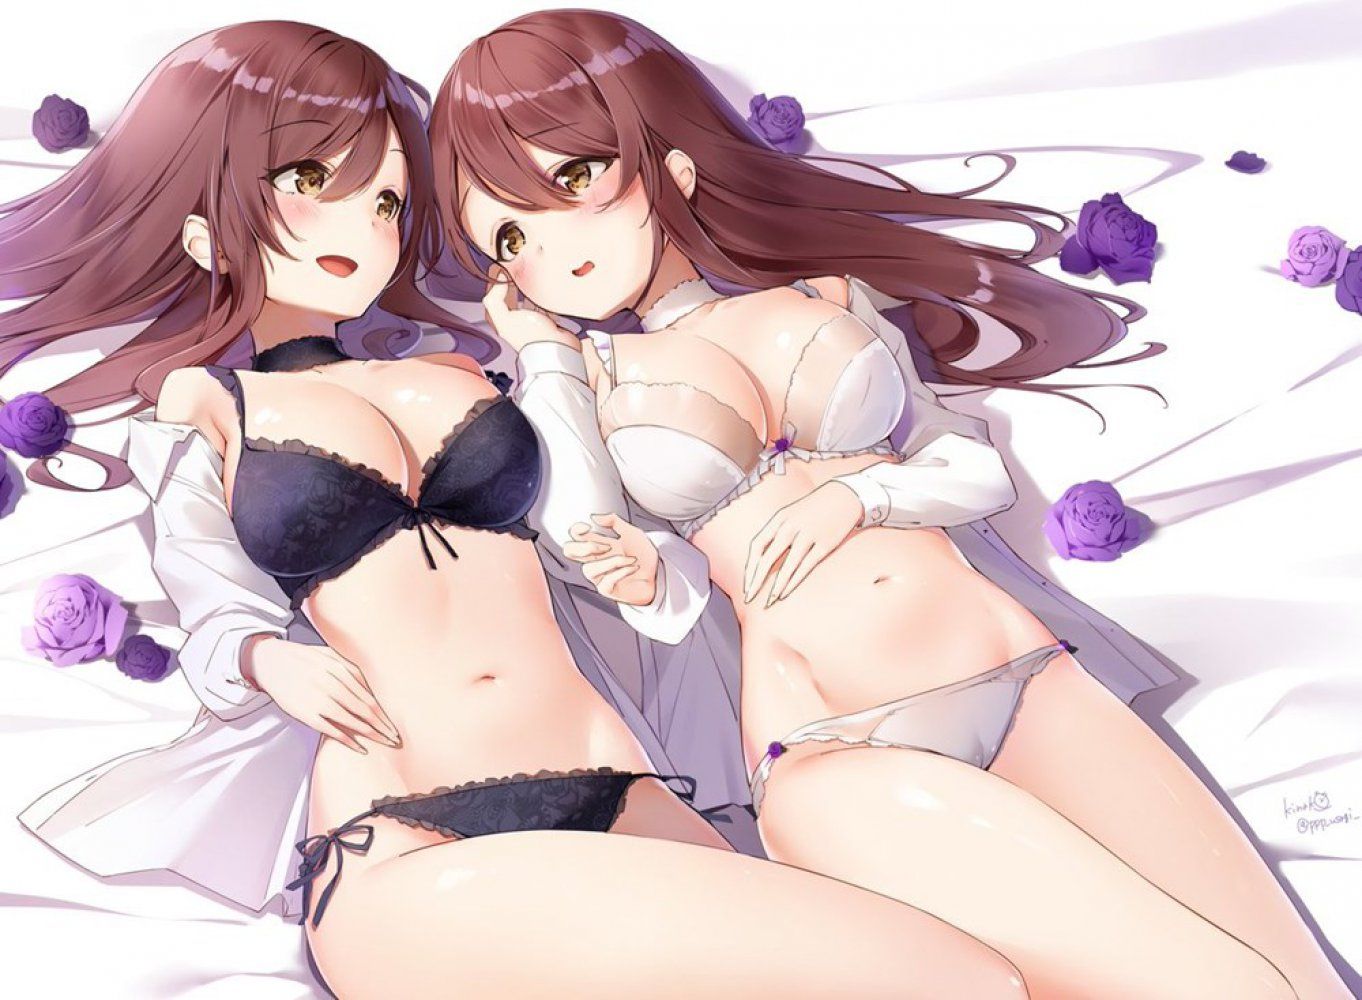 【Secondary】Female image in underwear and lingerie 【Elo】 37